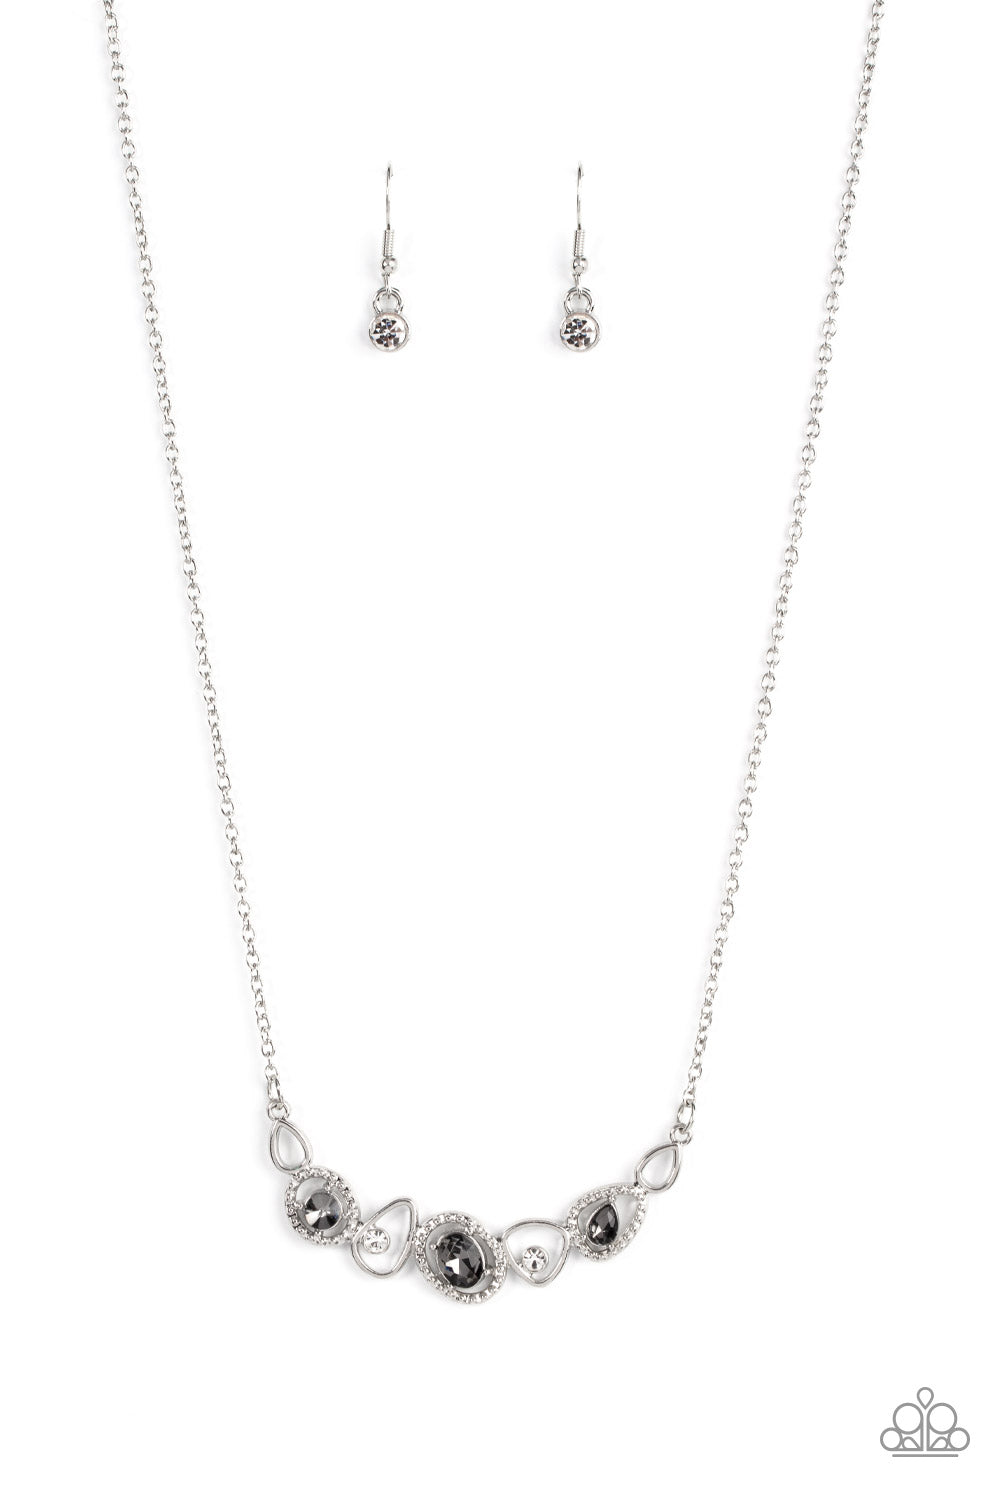 Celestial Cadence Paparazzi Accessories Necklace with Earrings